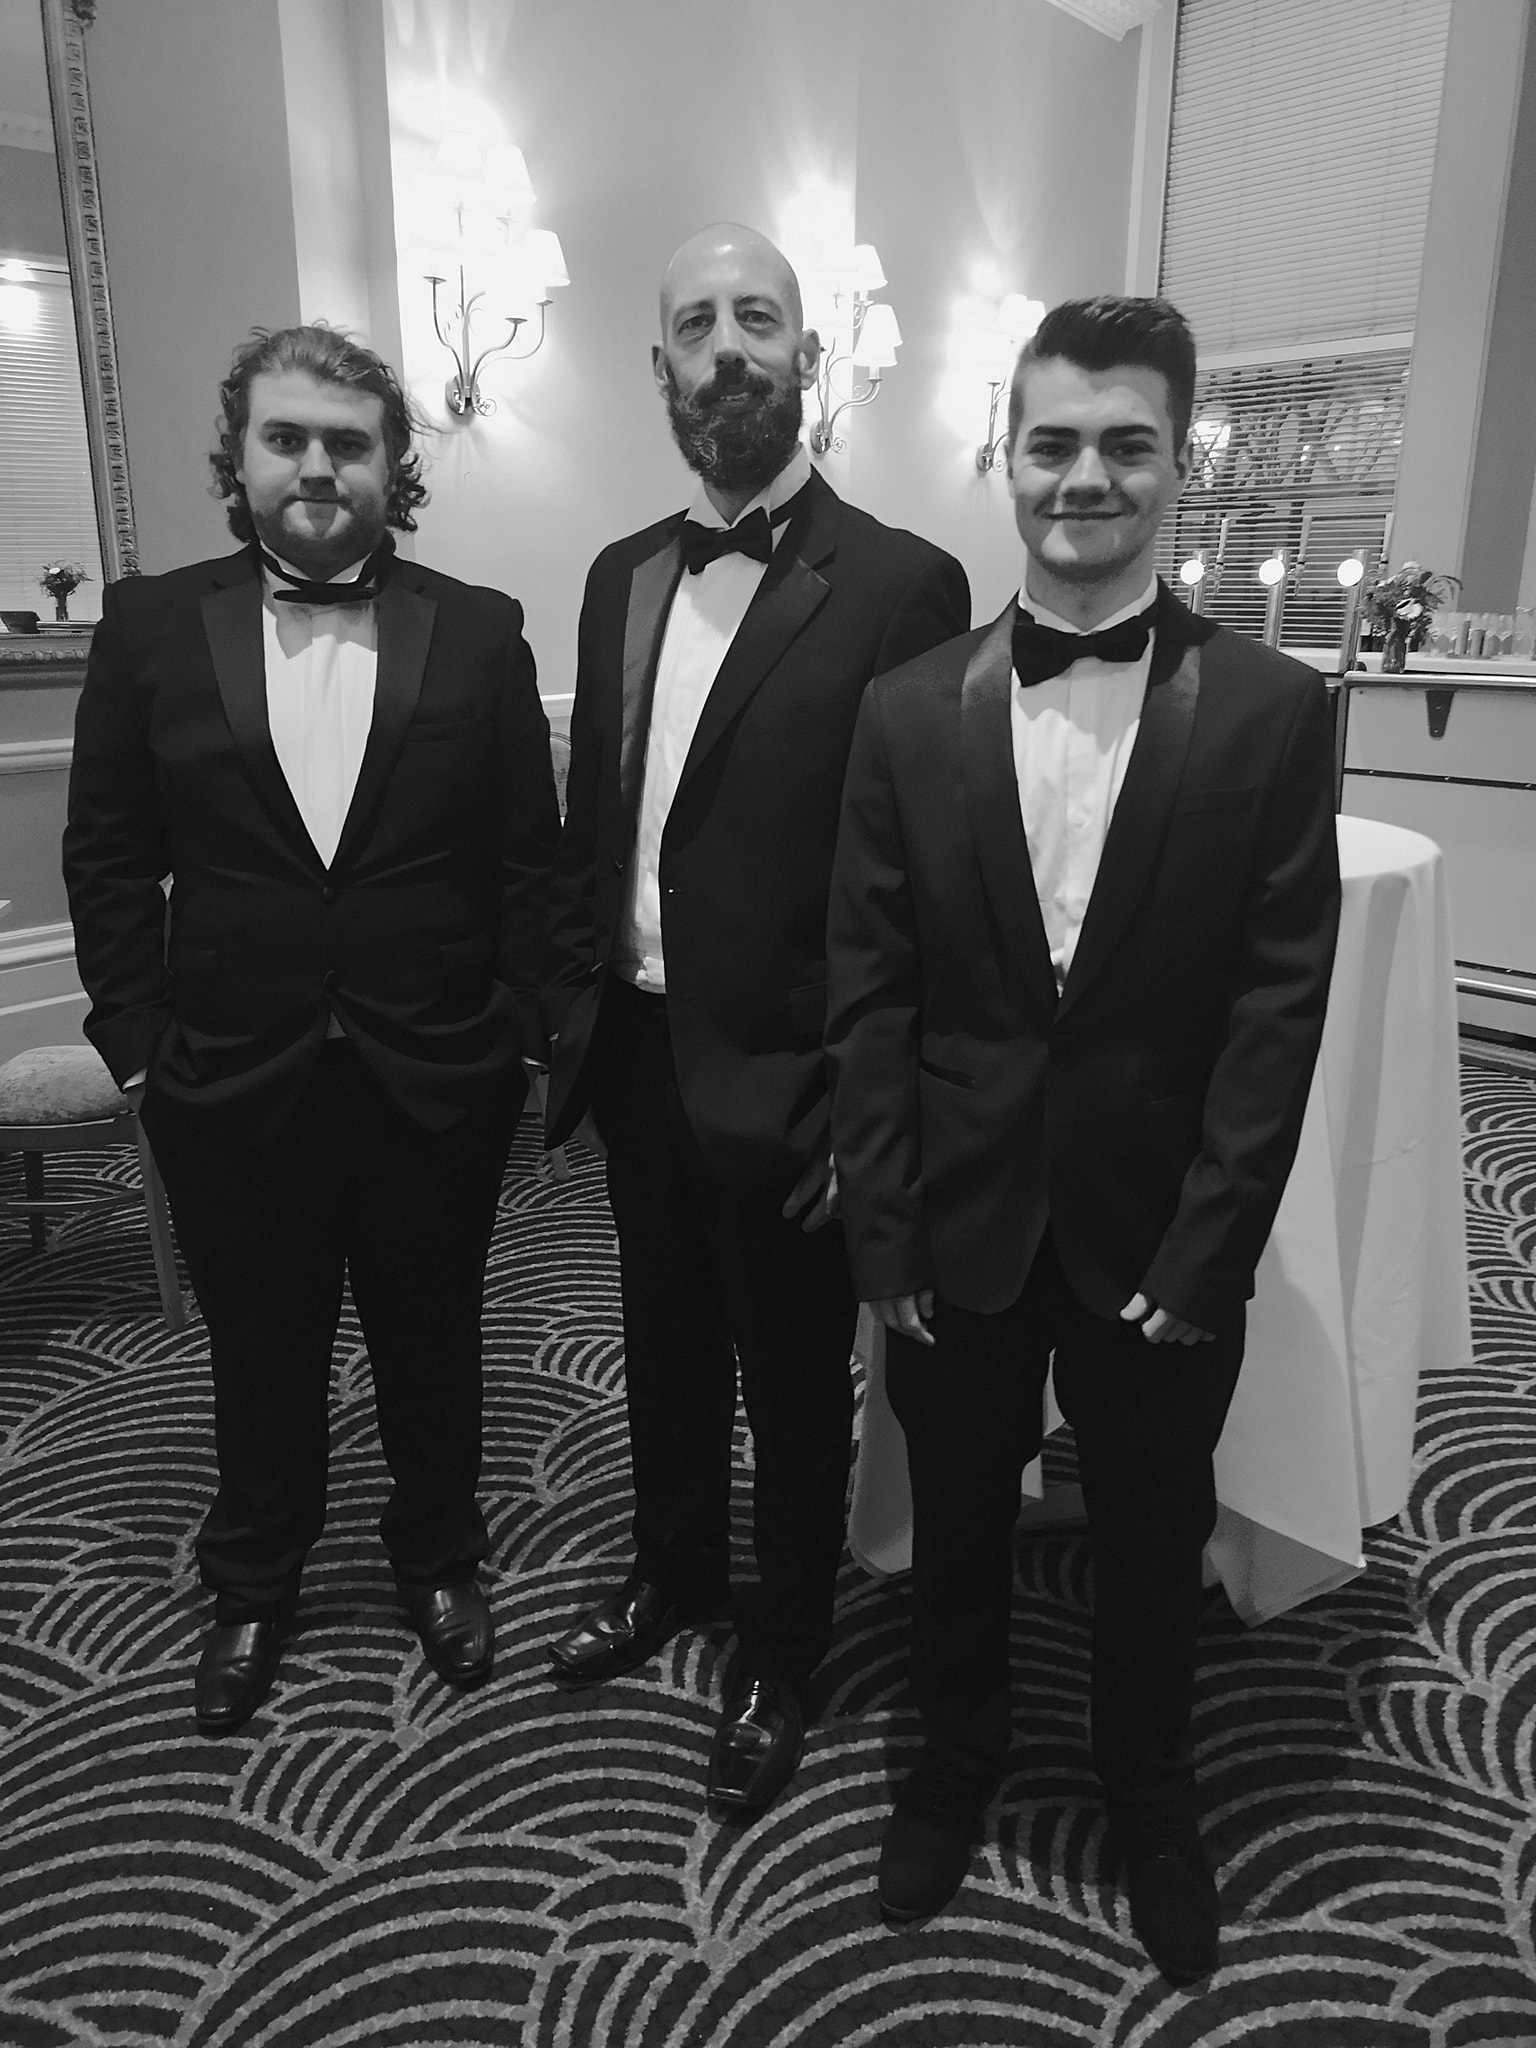 Dale, Ethan and Jon at the ball